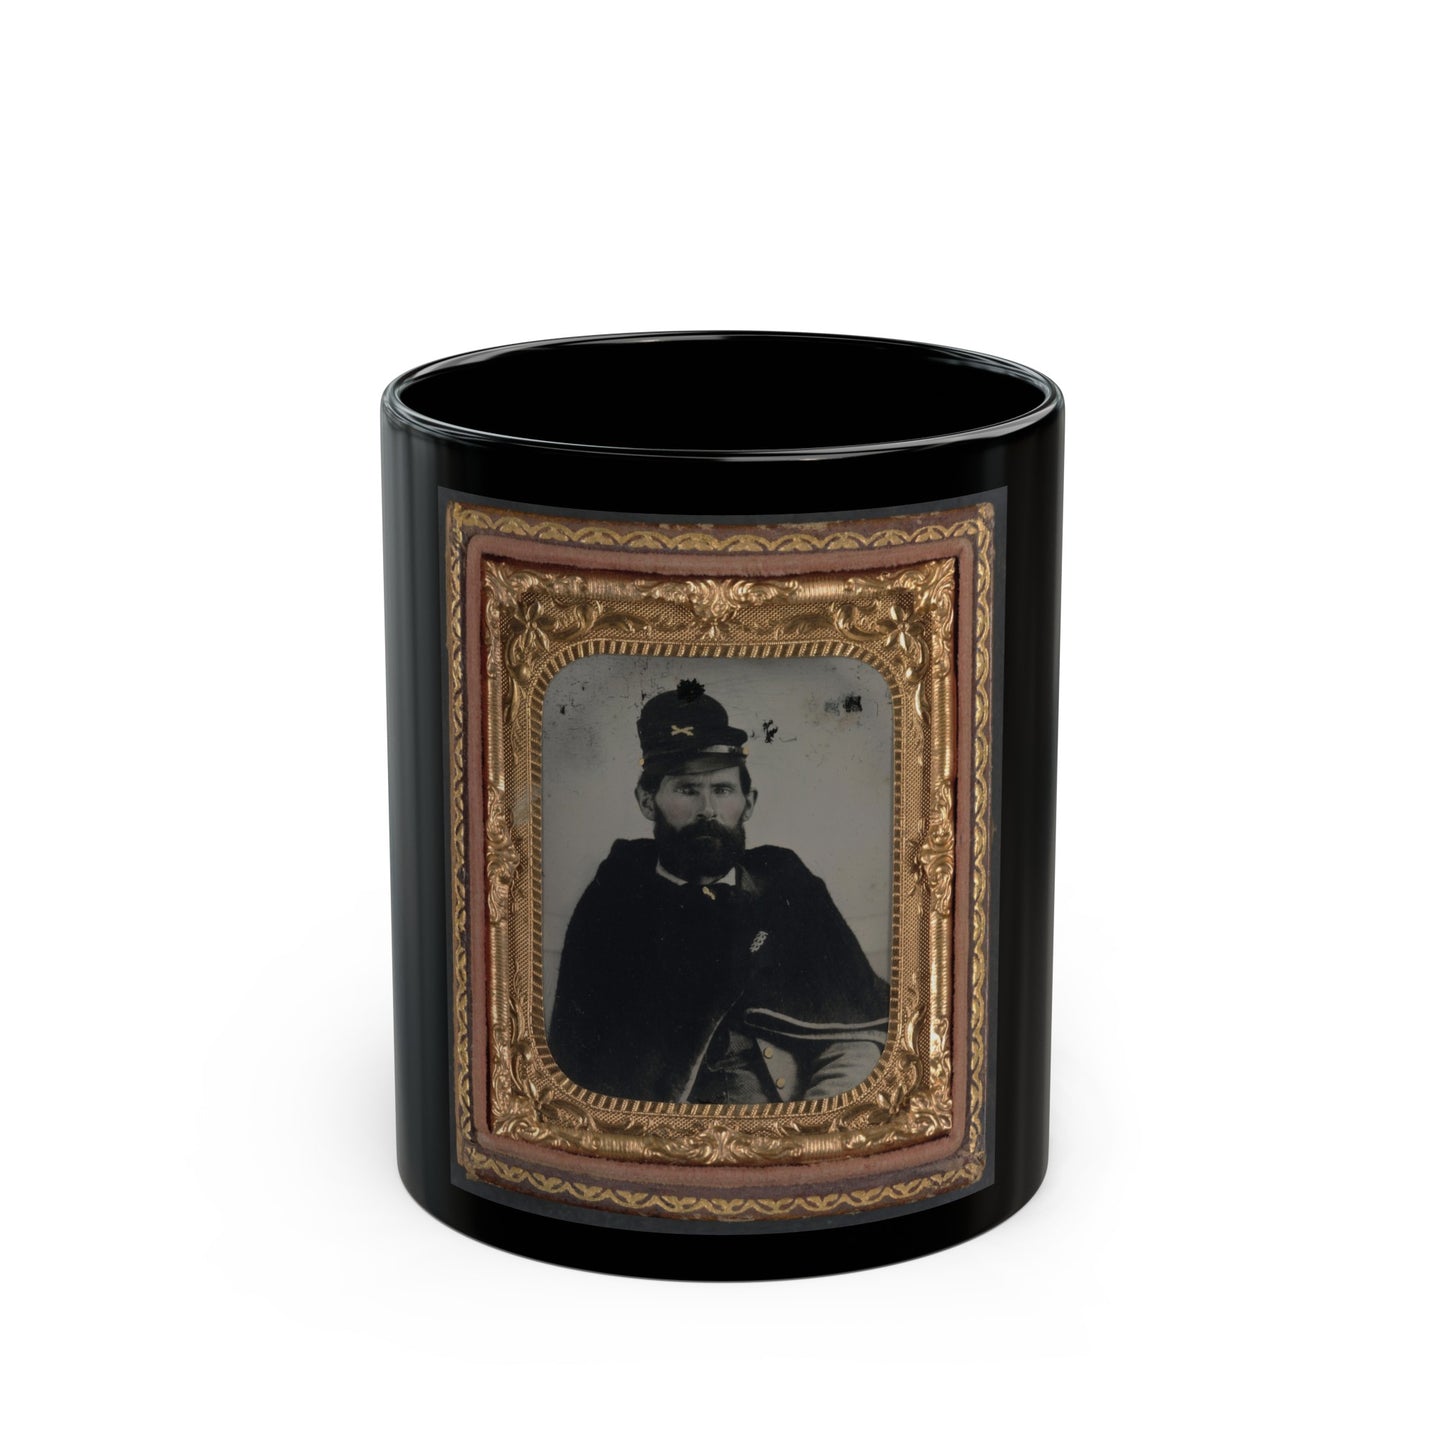 Private Archibald D. Council Of Co. K, 18th North Carolina Infantry Regiment, In Uniform And Wrapped With Hospital Blanket (U.S. Civil War) Black Coffee Mug